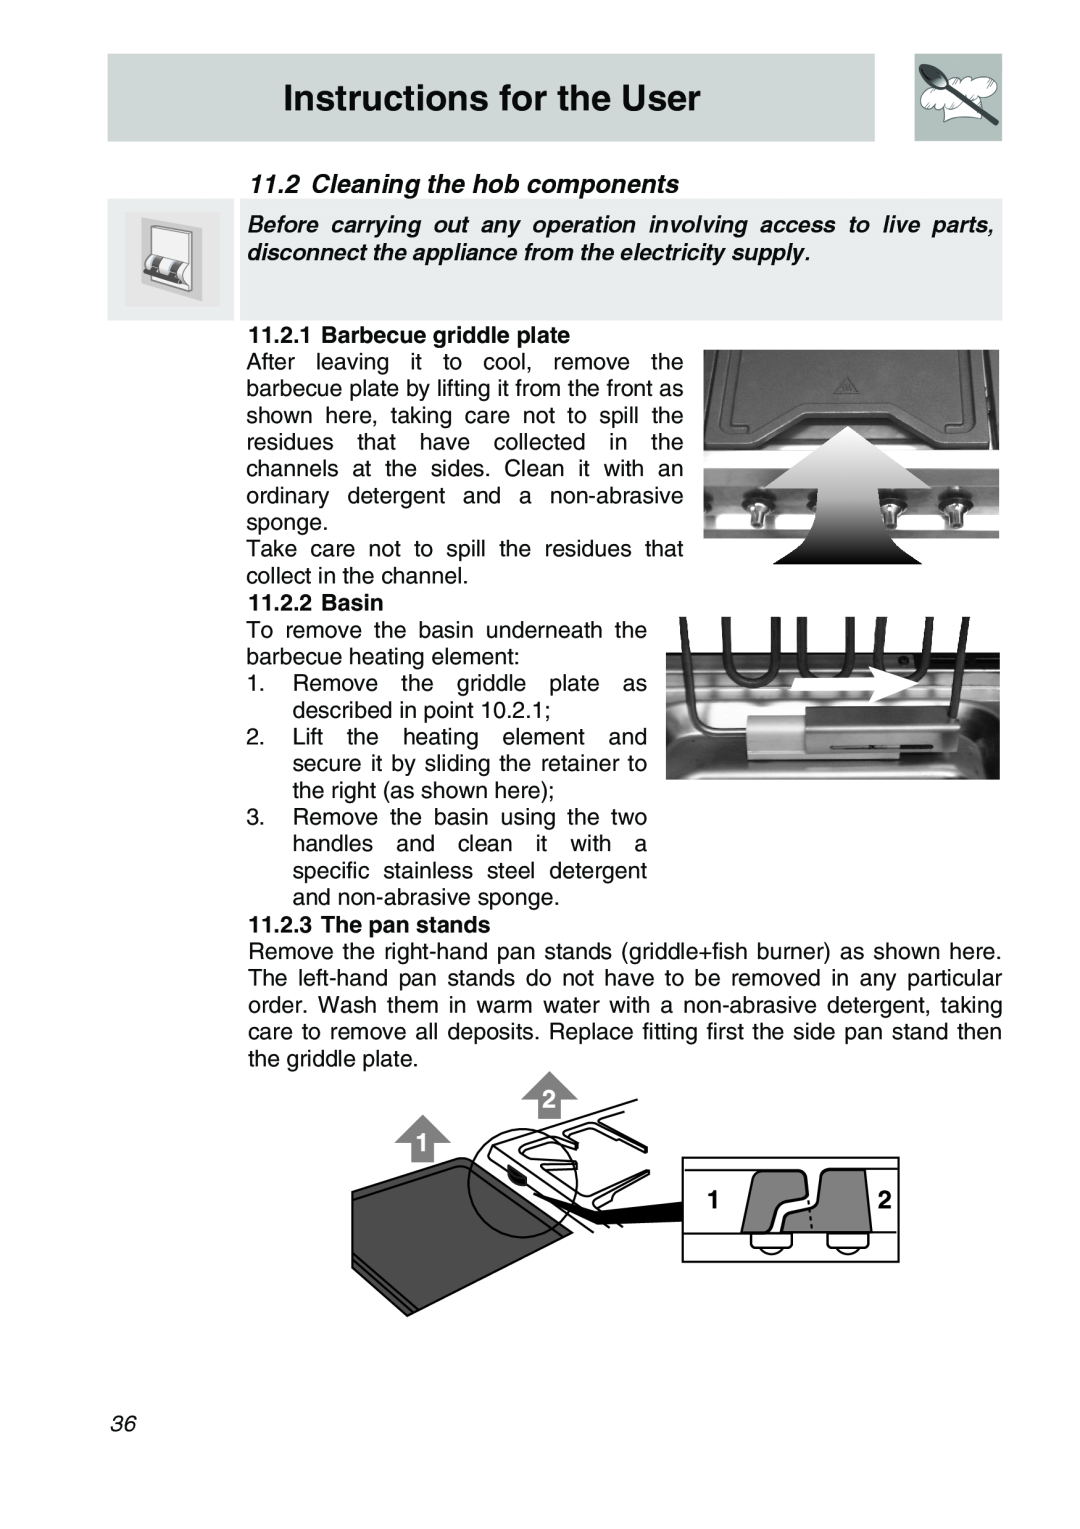 Smeg CSA150X-6 Cleaning the hob components, Barbecue griddle plate, Basin, 11.2.3The pan stands, Instructions for the User 